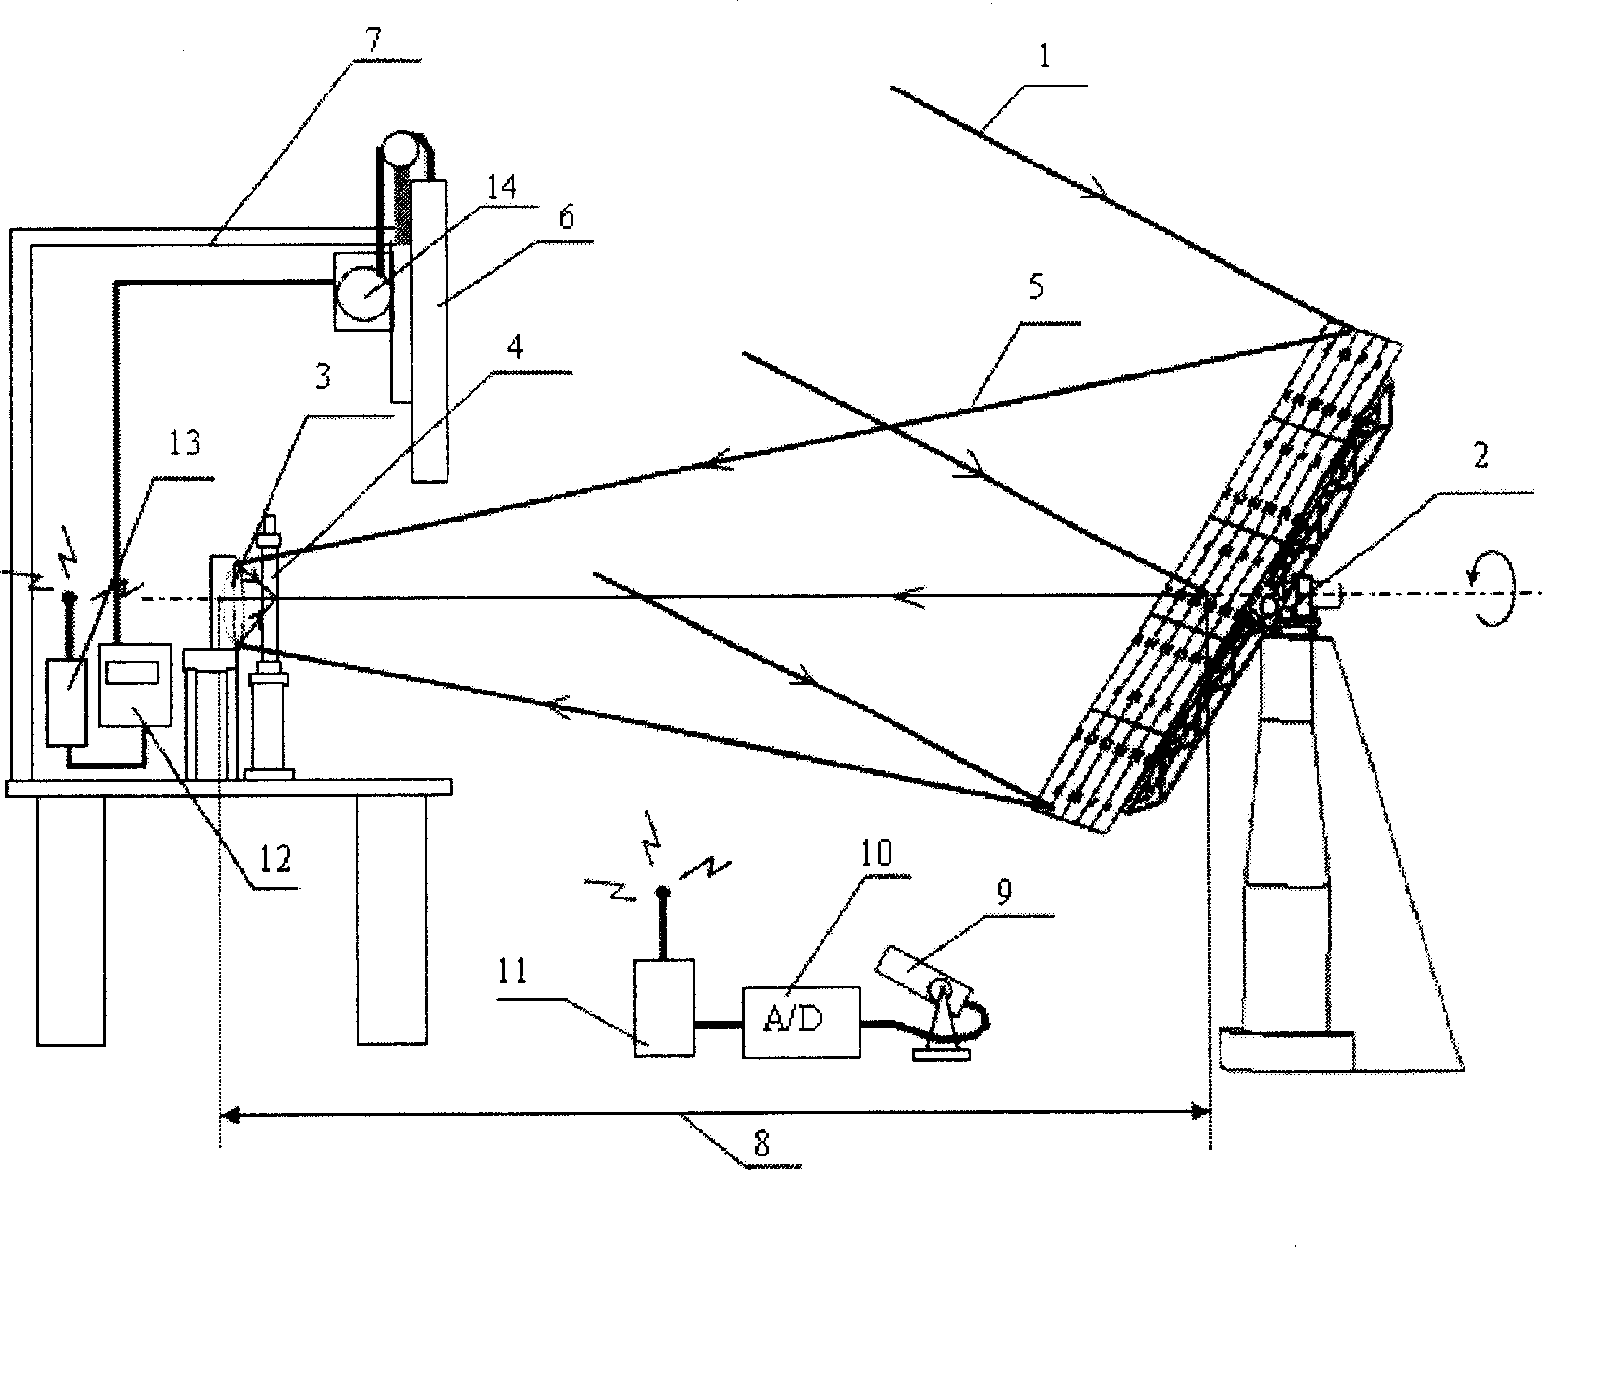 Method for vacuum prification of material by self-rotation elevation tracked solar furnace